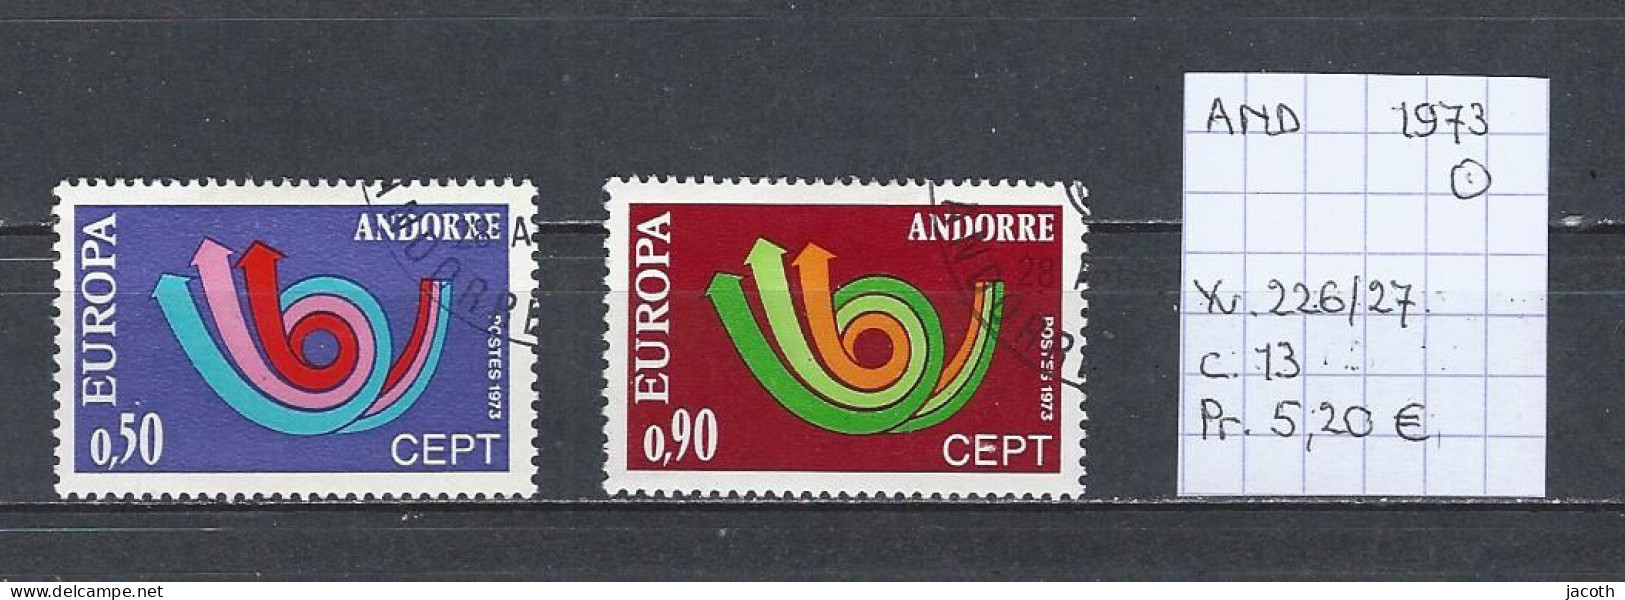 (TJ) Europa CEPT 1973 - Andorre YT 226/27 (gest./obl./used) - 1973